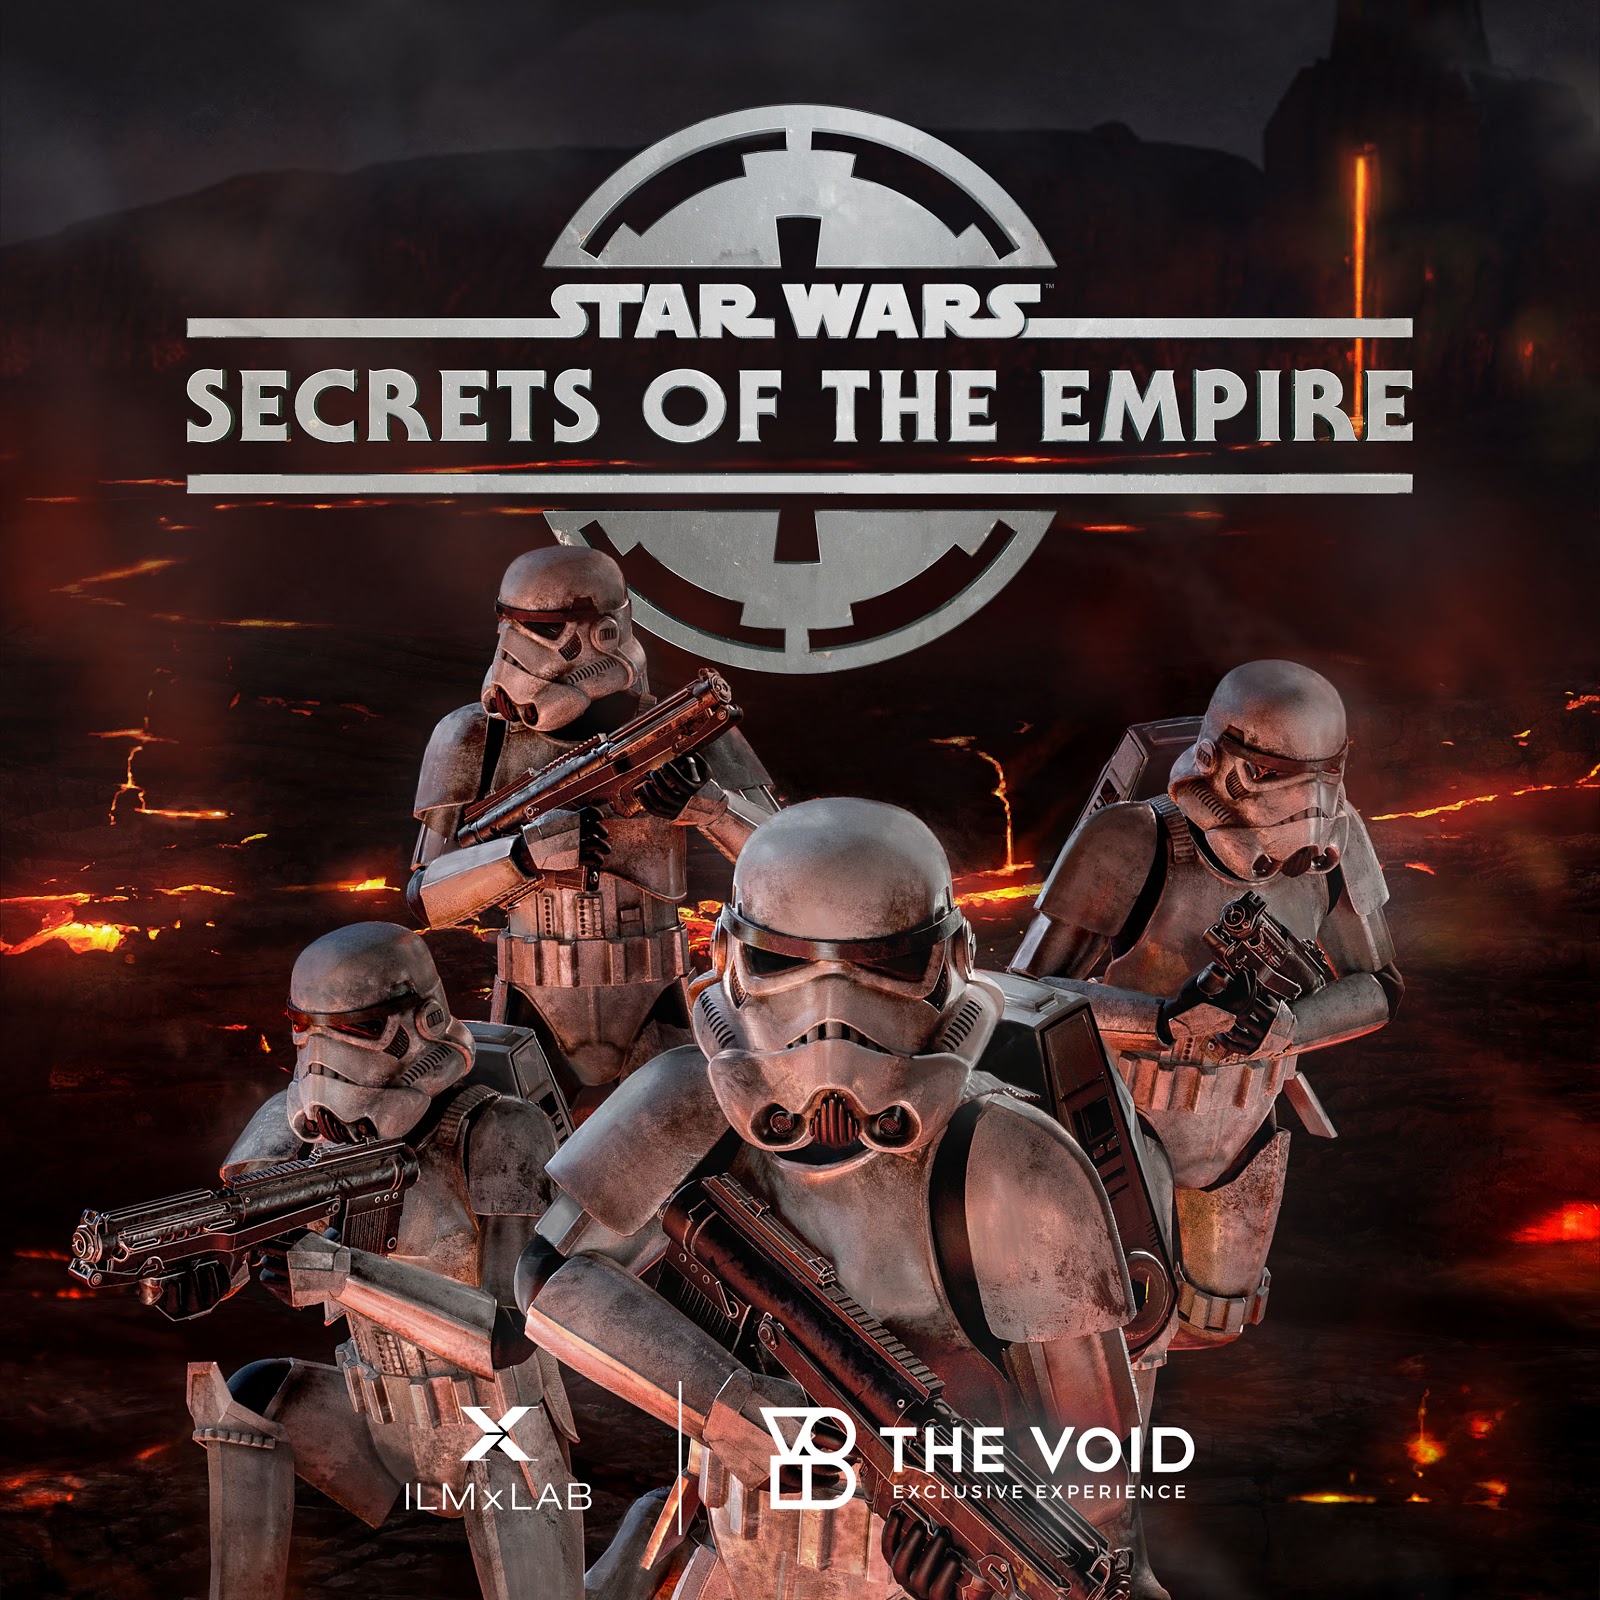 The VOID Will be Offering an Exclusive “May the 4th..Be On Us” Promotion to Celebrate Star Wars Day